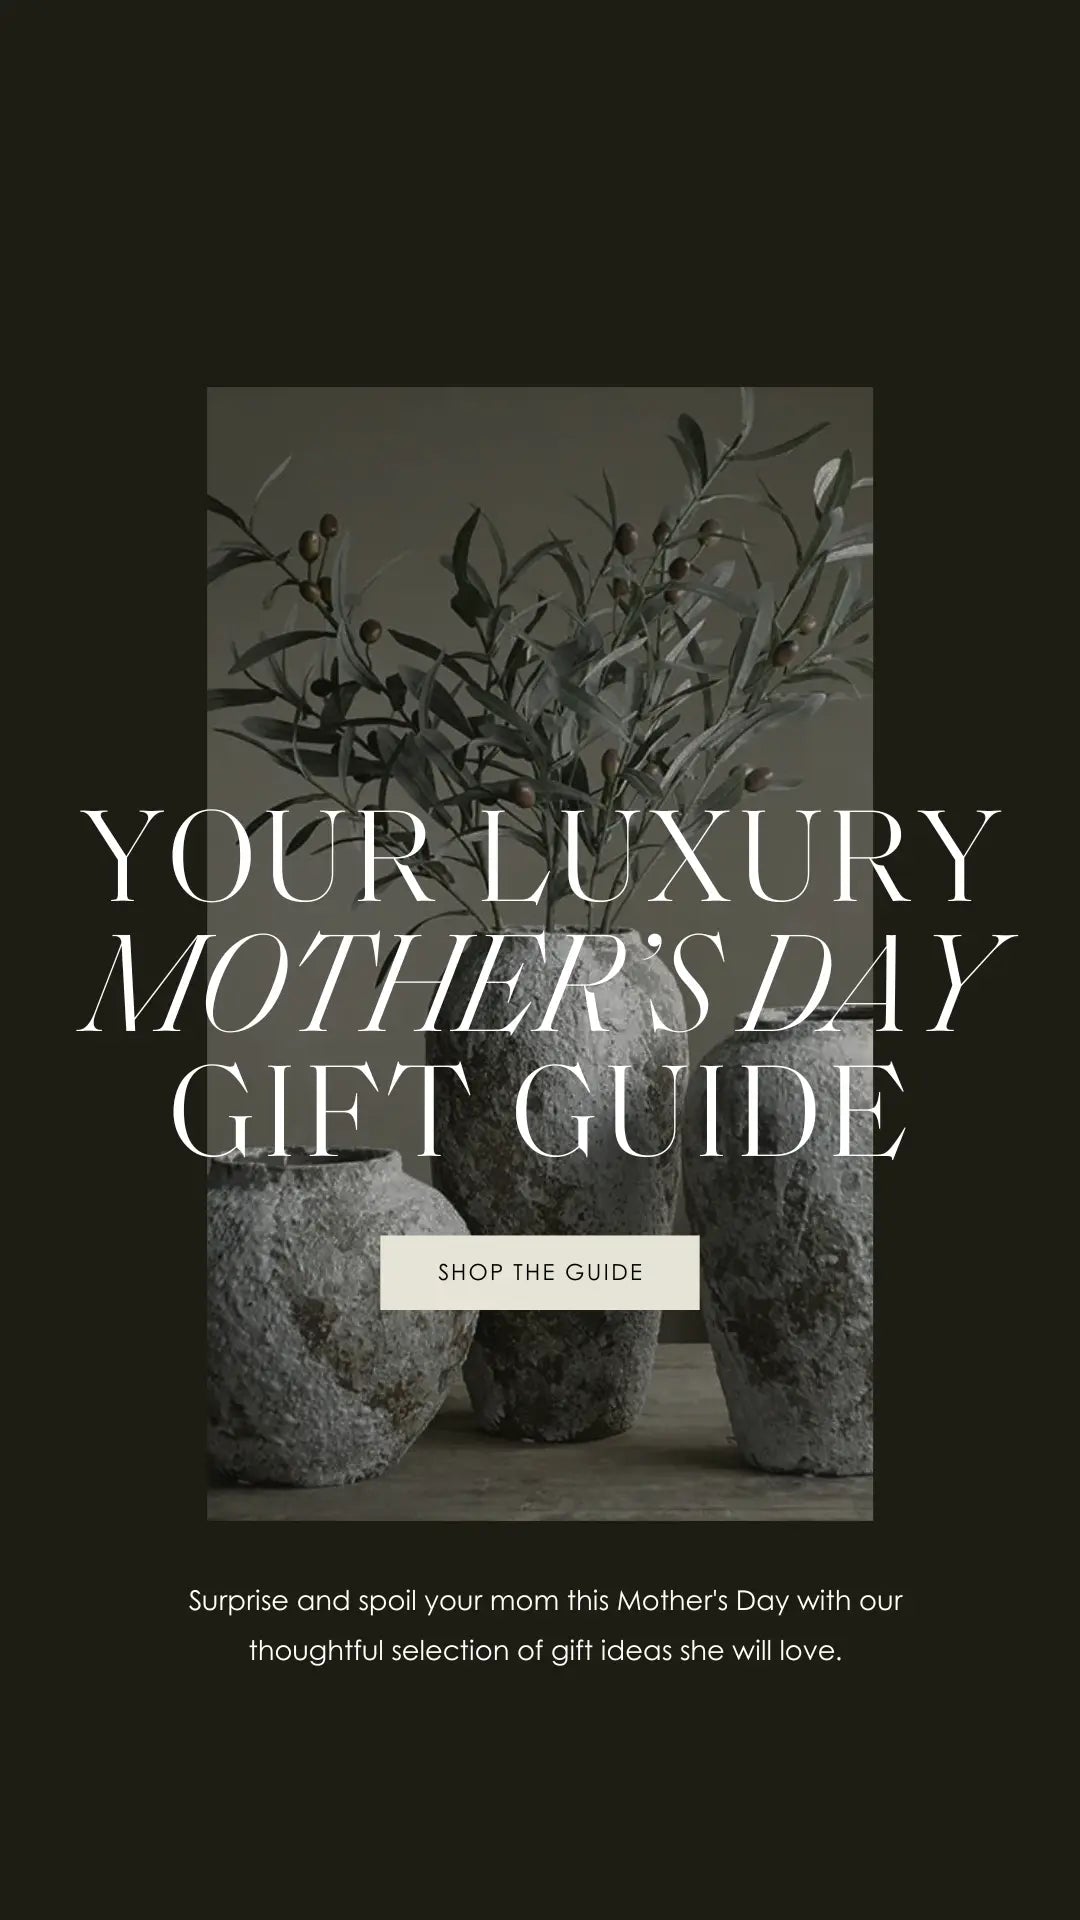 Your Luxury Mother's Day Gift Guide - La Galerie à La Mode